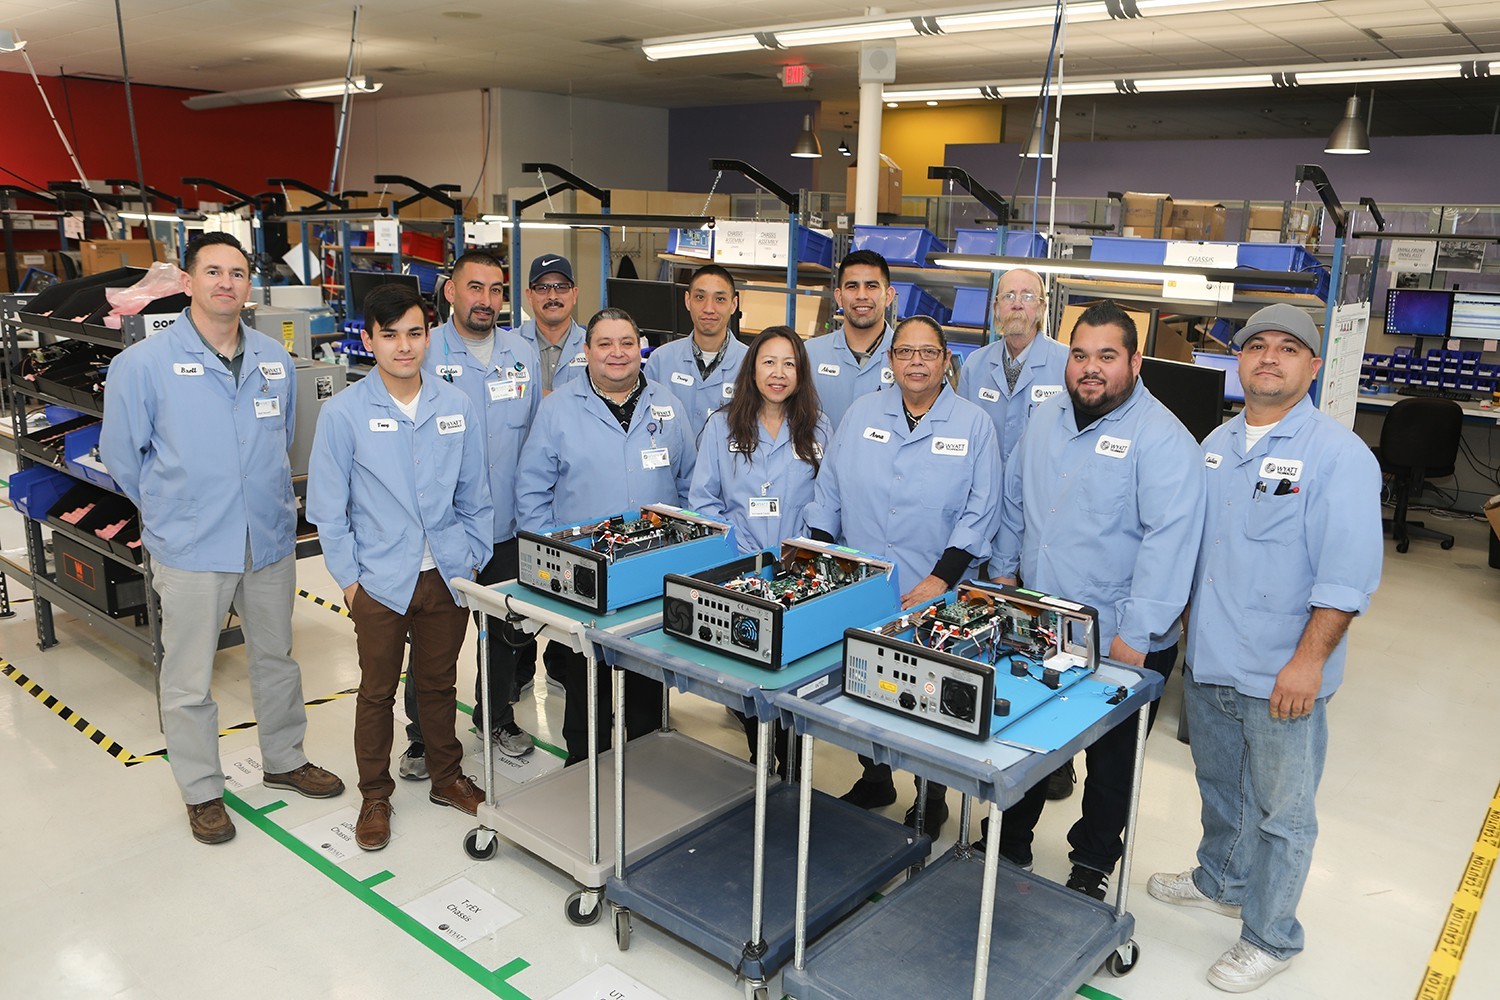 Our valued manufacturing team who build all Wyatt instruments at our headquarters located in Santa Barbara, CA. 